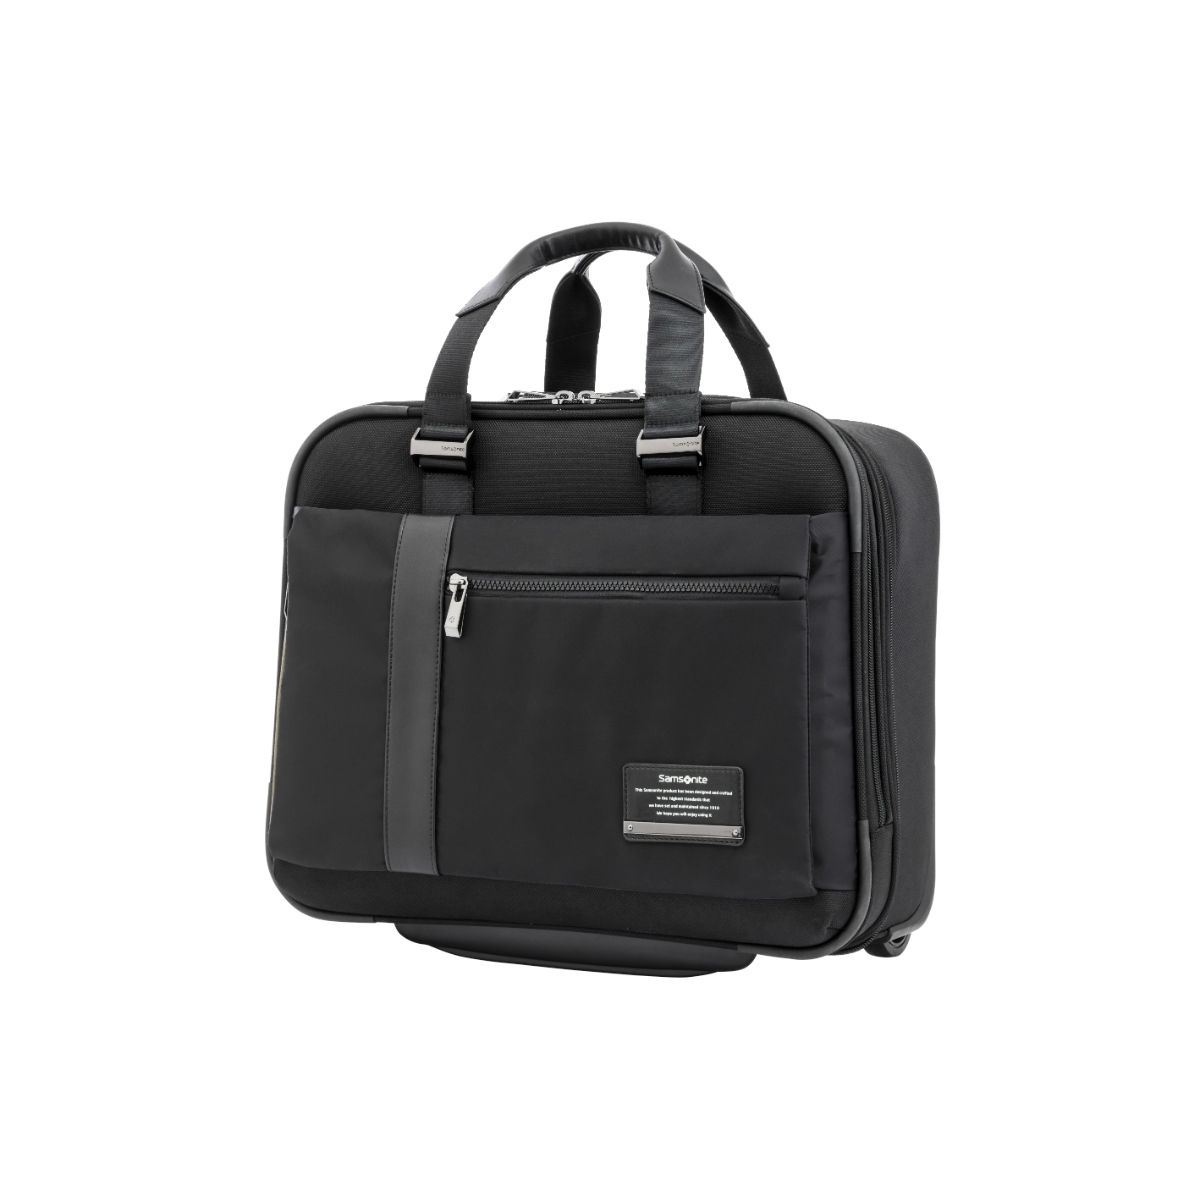 Discover more than 76 samsonite excursion bag india - in.cdgdbentre